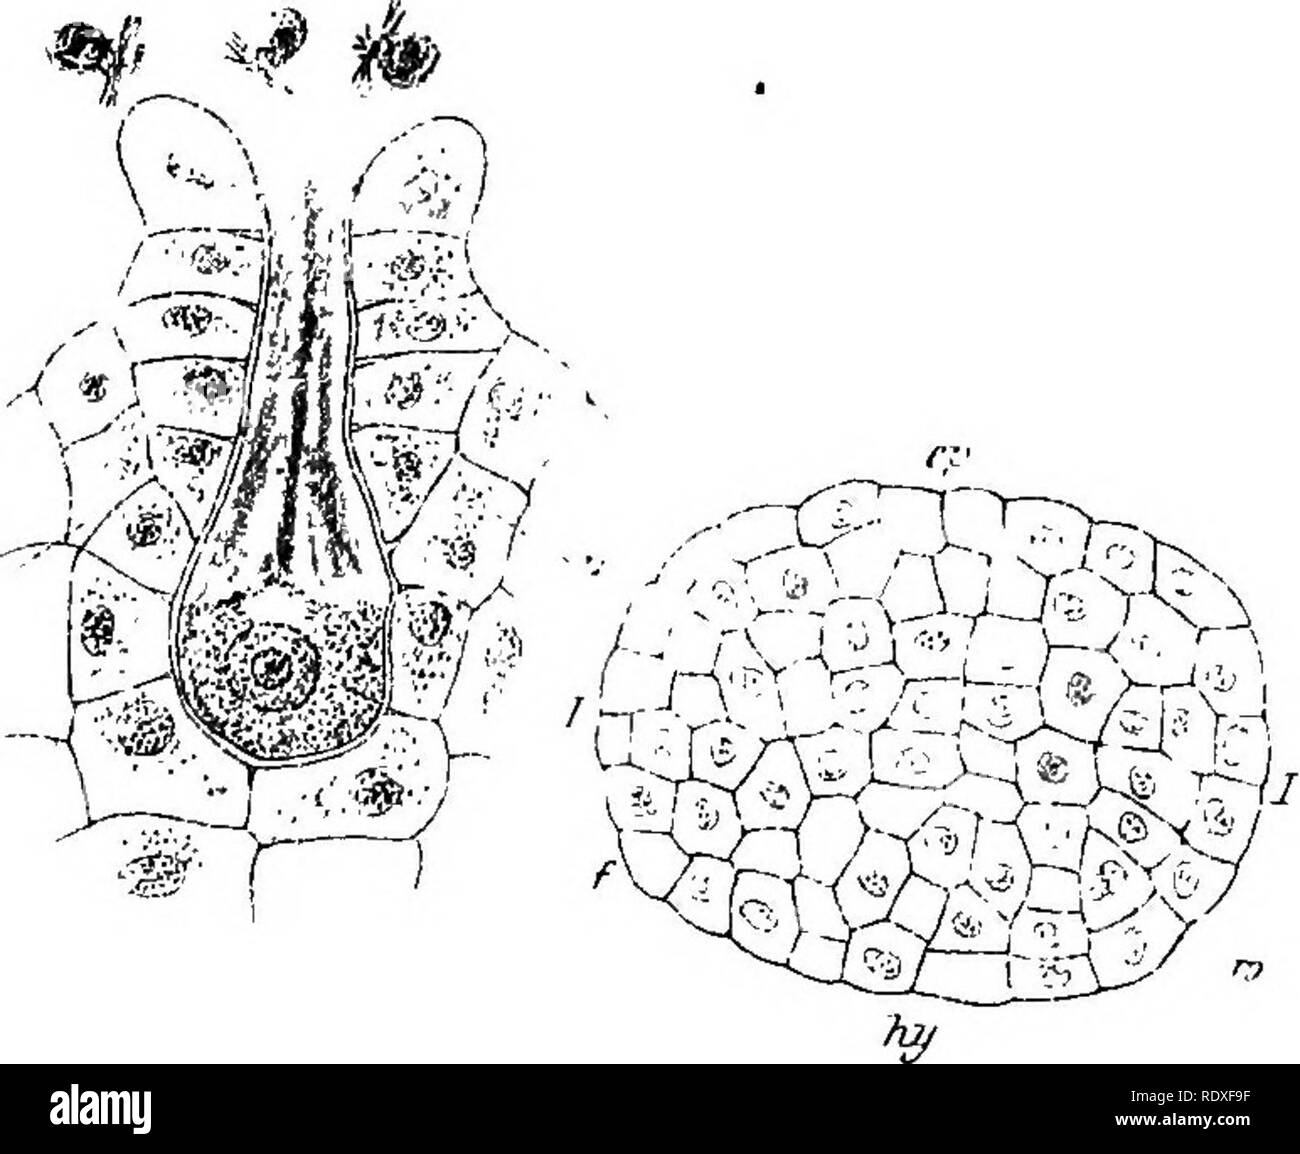 . The origin of a land flora, a theory based upon the facts of alternation. Plant morphology. Fig. 260 Ophioglossum vulgatum, L. The central figure shows an archegonium, at period of fertilisation. X 225. The left-hand figure shows the first division of the zygote. X 225. To the right a more advanced embryo. /, /=basa] wall ; ?/=epibasal; ^=hypobasal hemisphere ; /= the region of the foot; w=root. X225. (After Bruchmann.) and opposite the neck of the archegonium, the cotyledon and the apex of the axis appear simultaneously, the cotyledon being on the side of the axis next to the first root: su Stock Photo